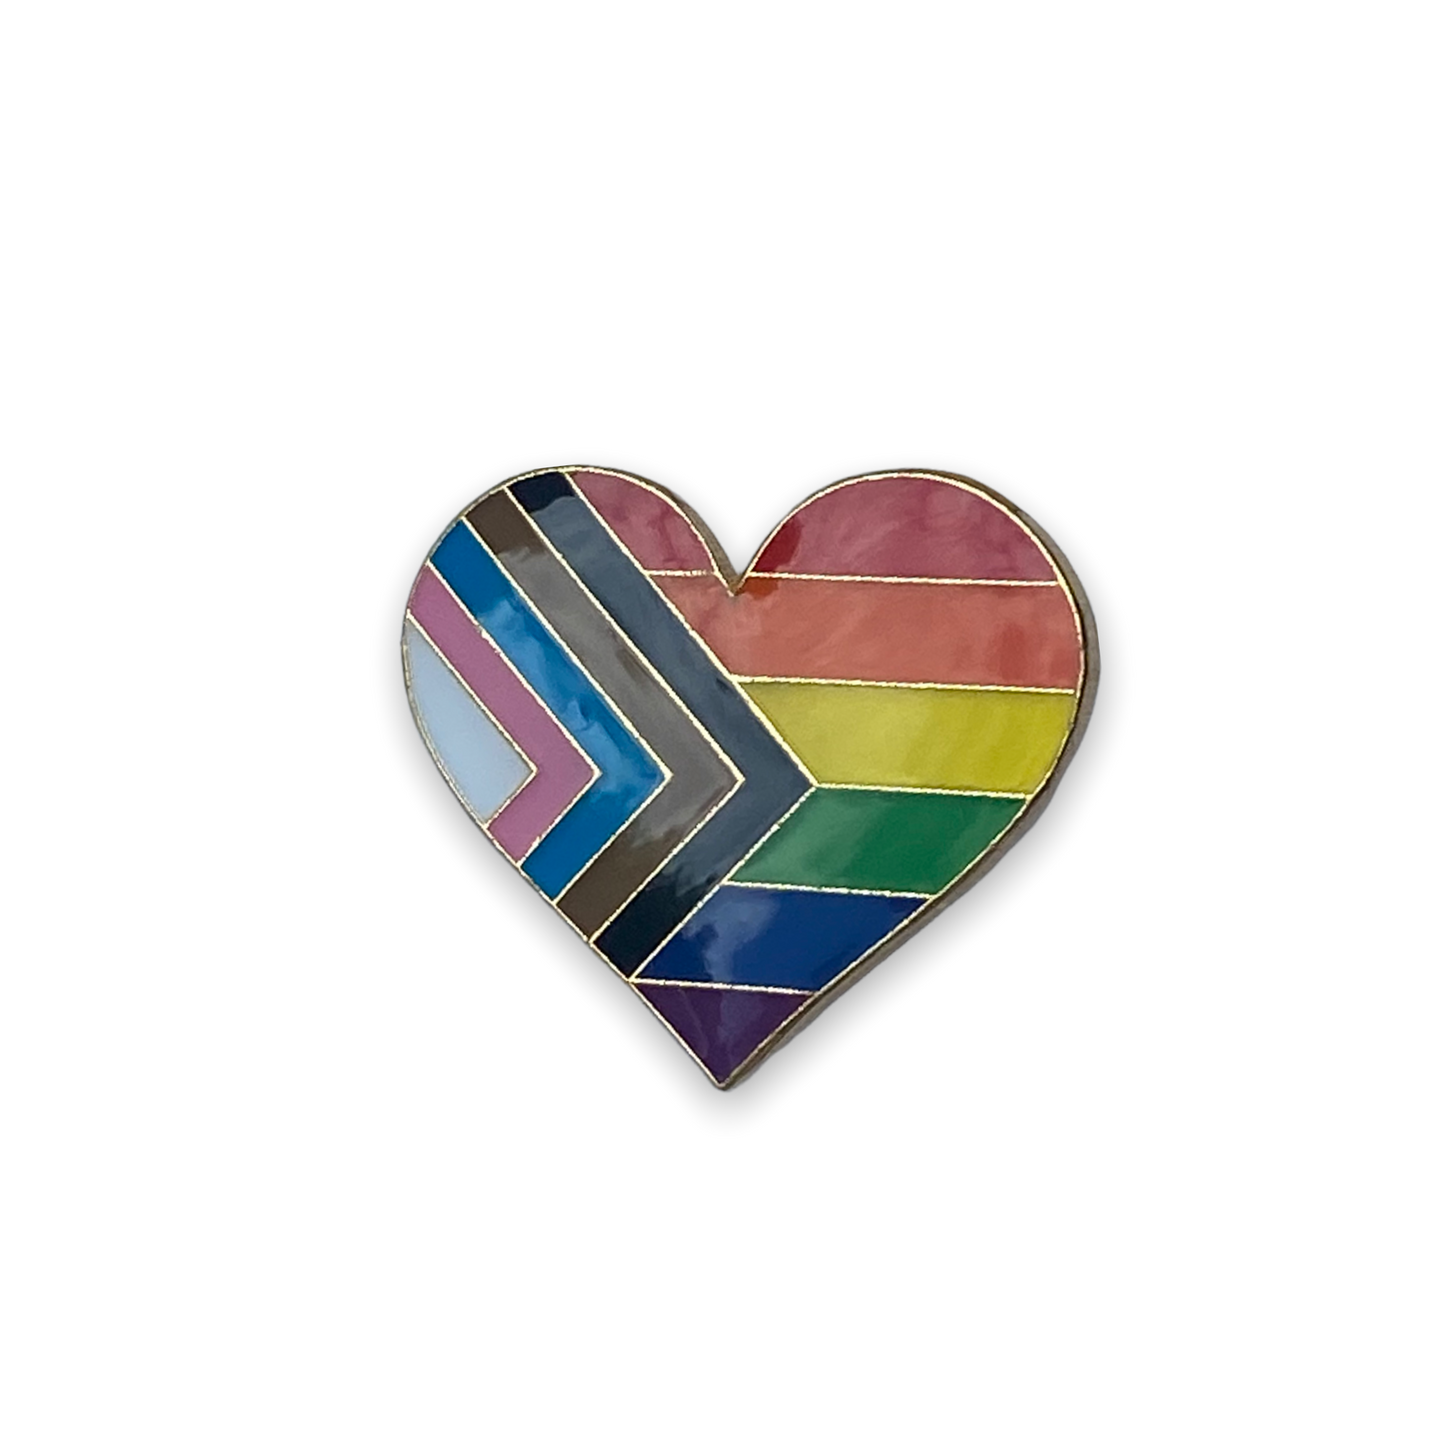 Inclusion Pin, Enamel Inclusion Gift, Lanyard accessory